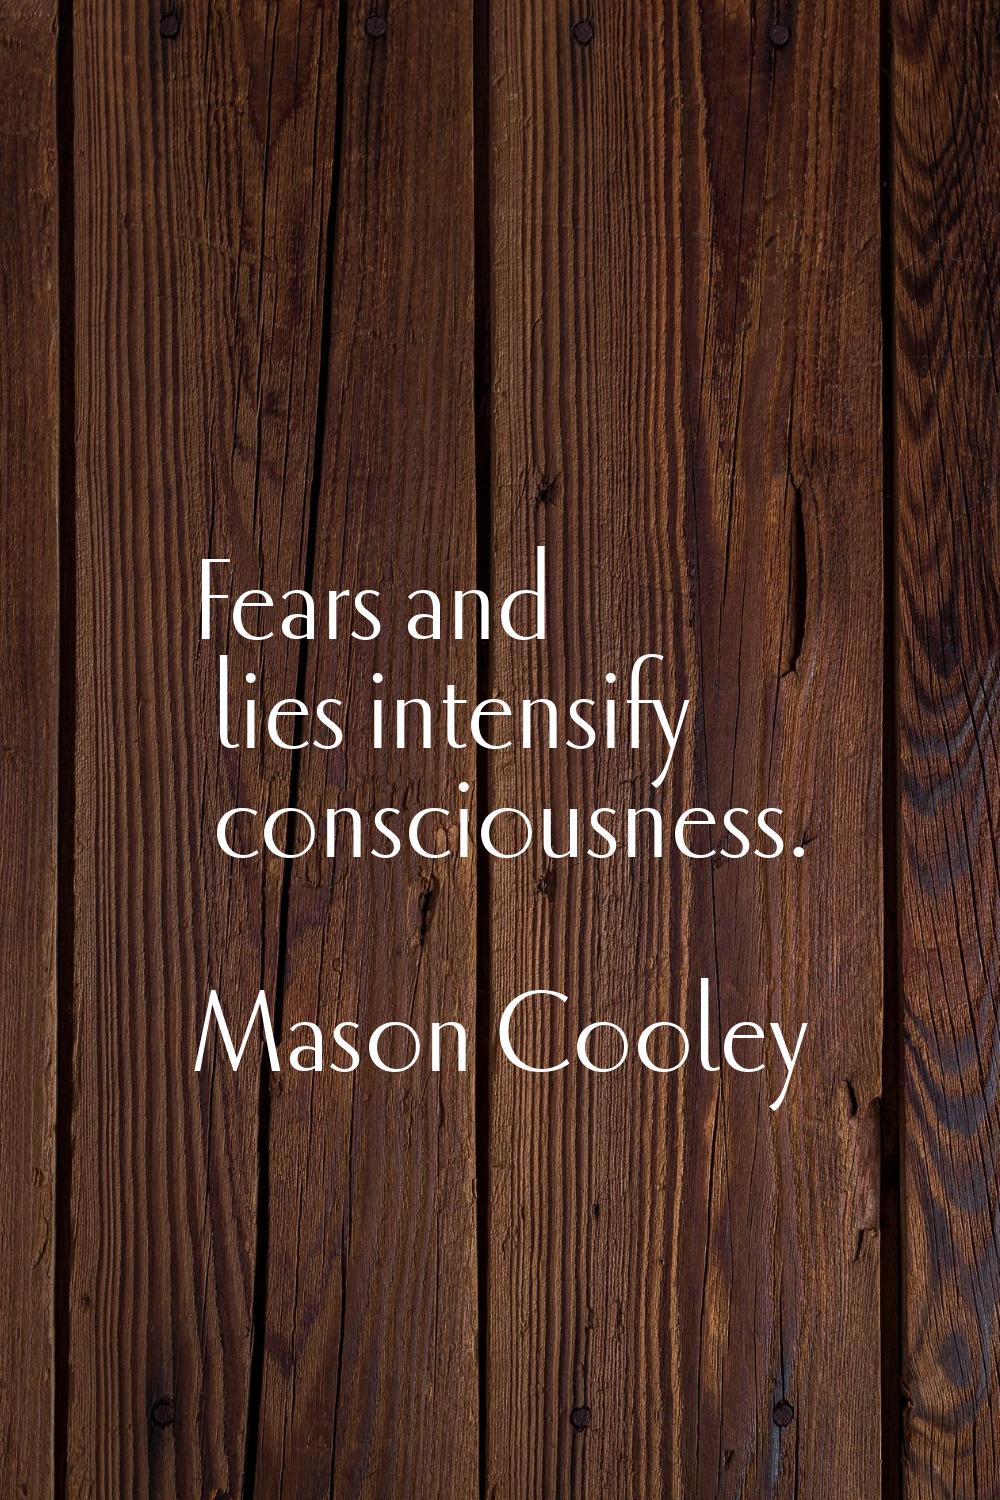 Fears and lies intensify consciousness.